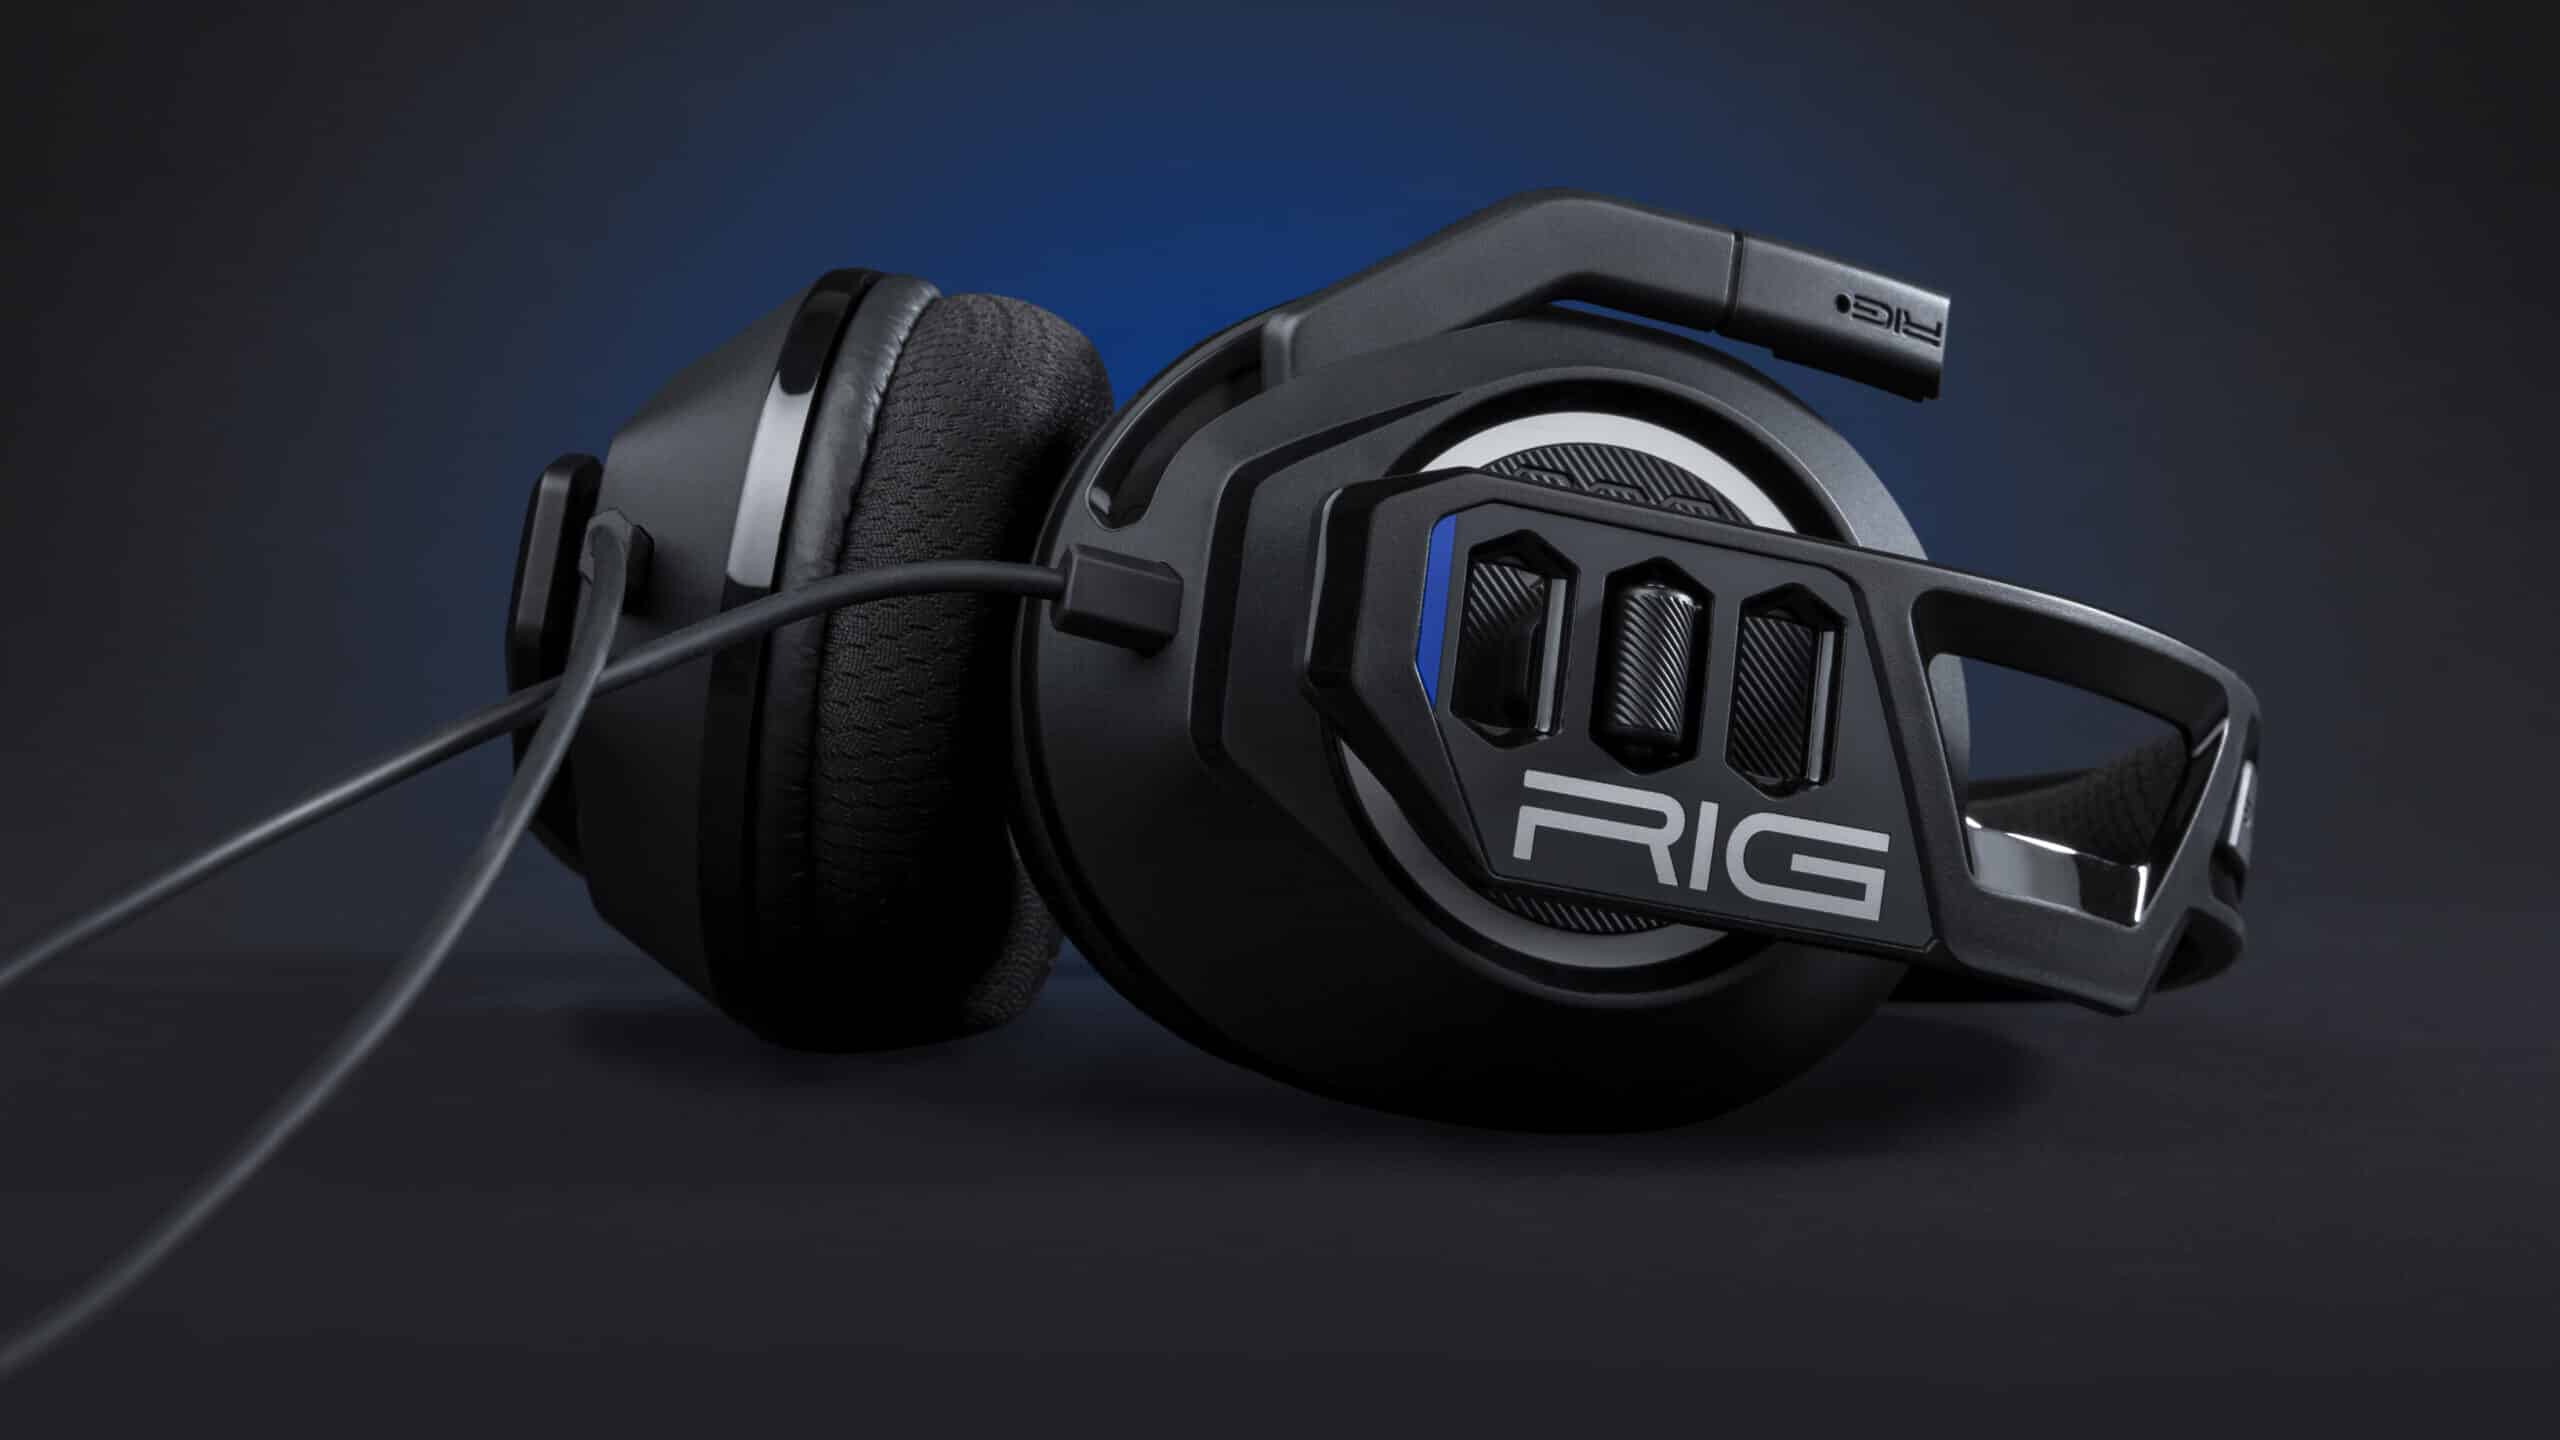 Nacon RIG 300 PRO HS Gaming Headset